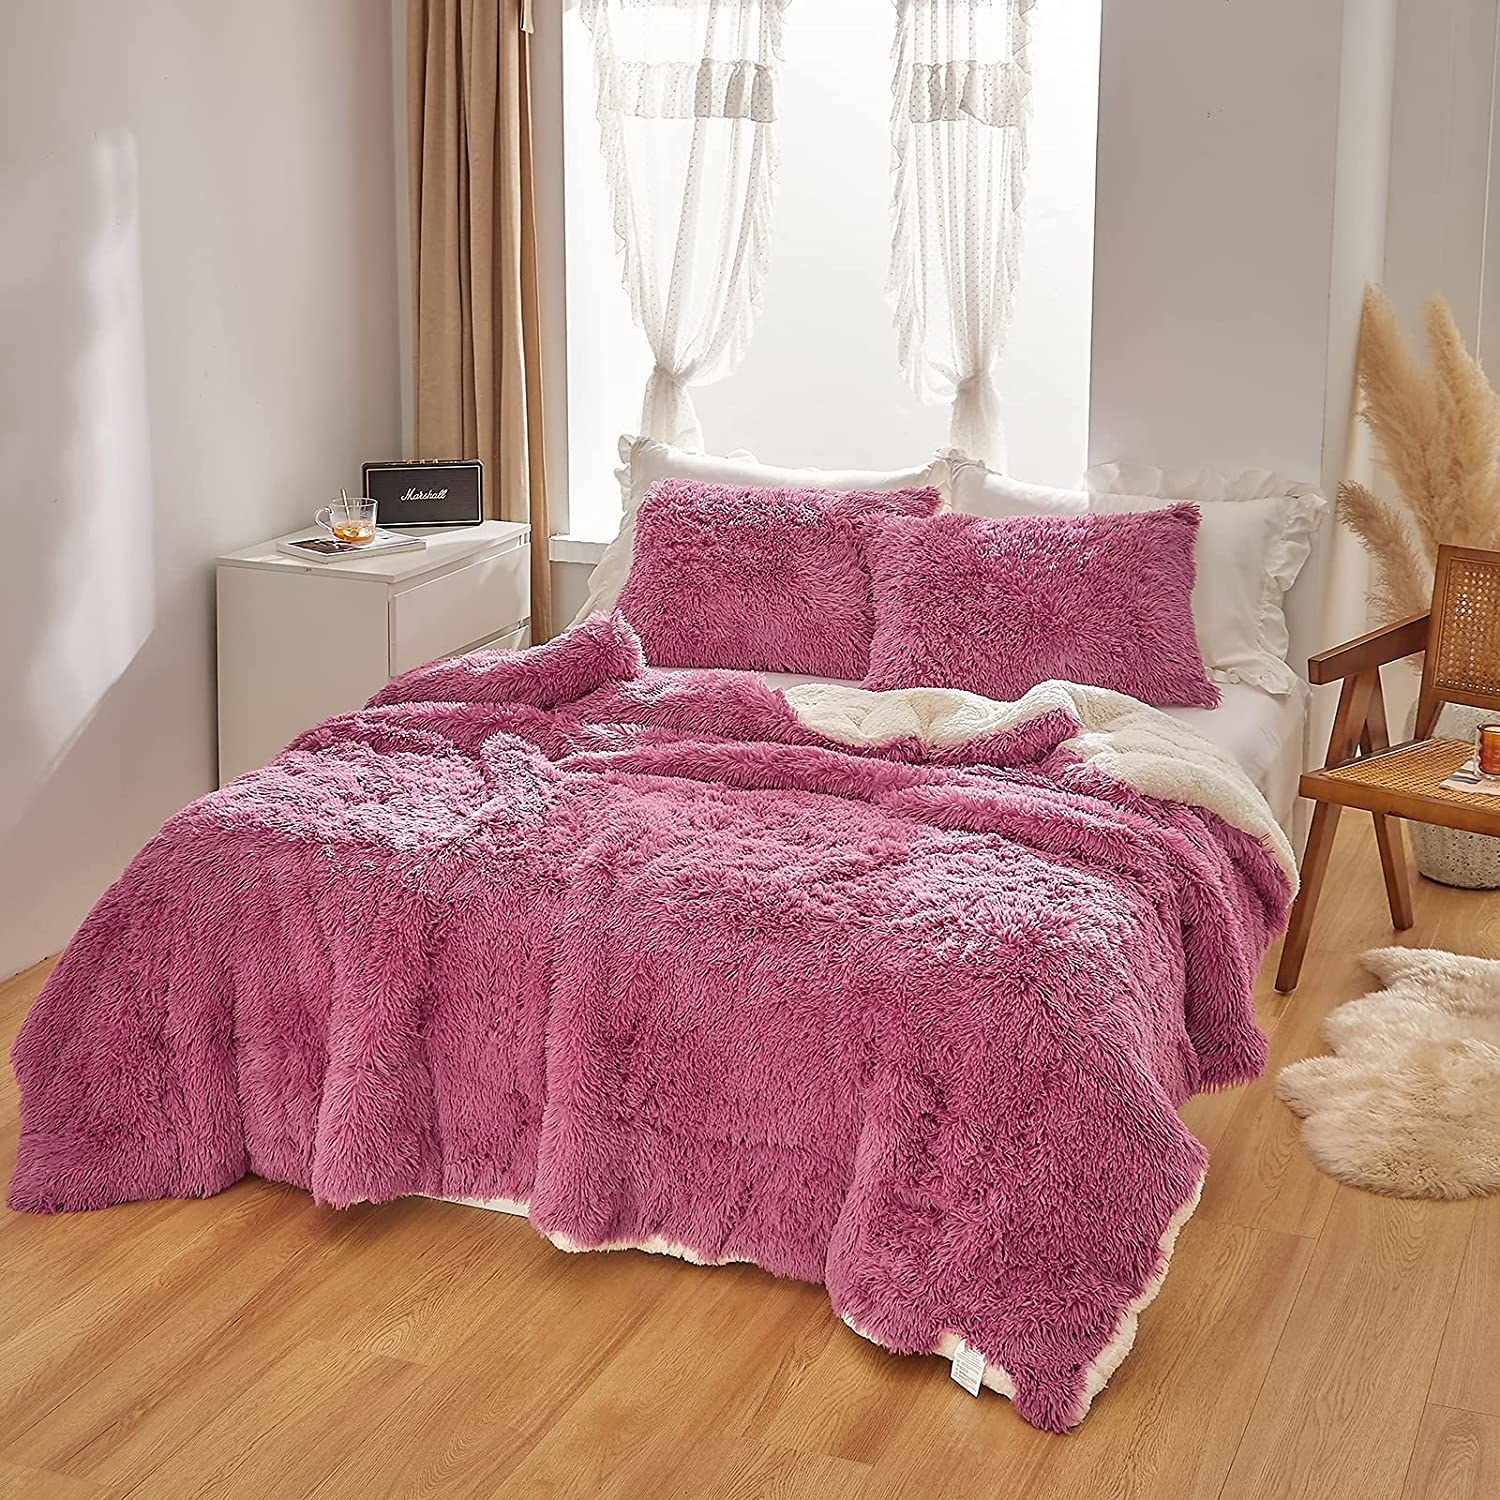 raspberry-colored faux fur comforter and pillowcases on bed